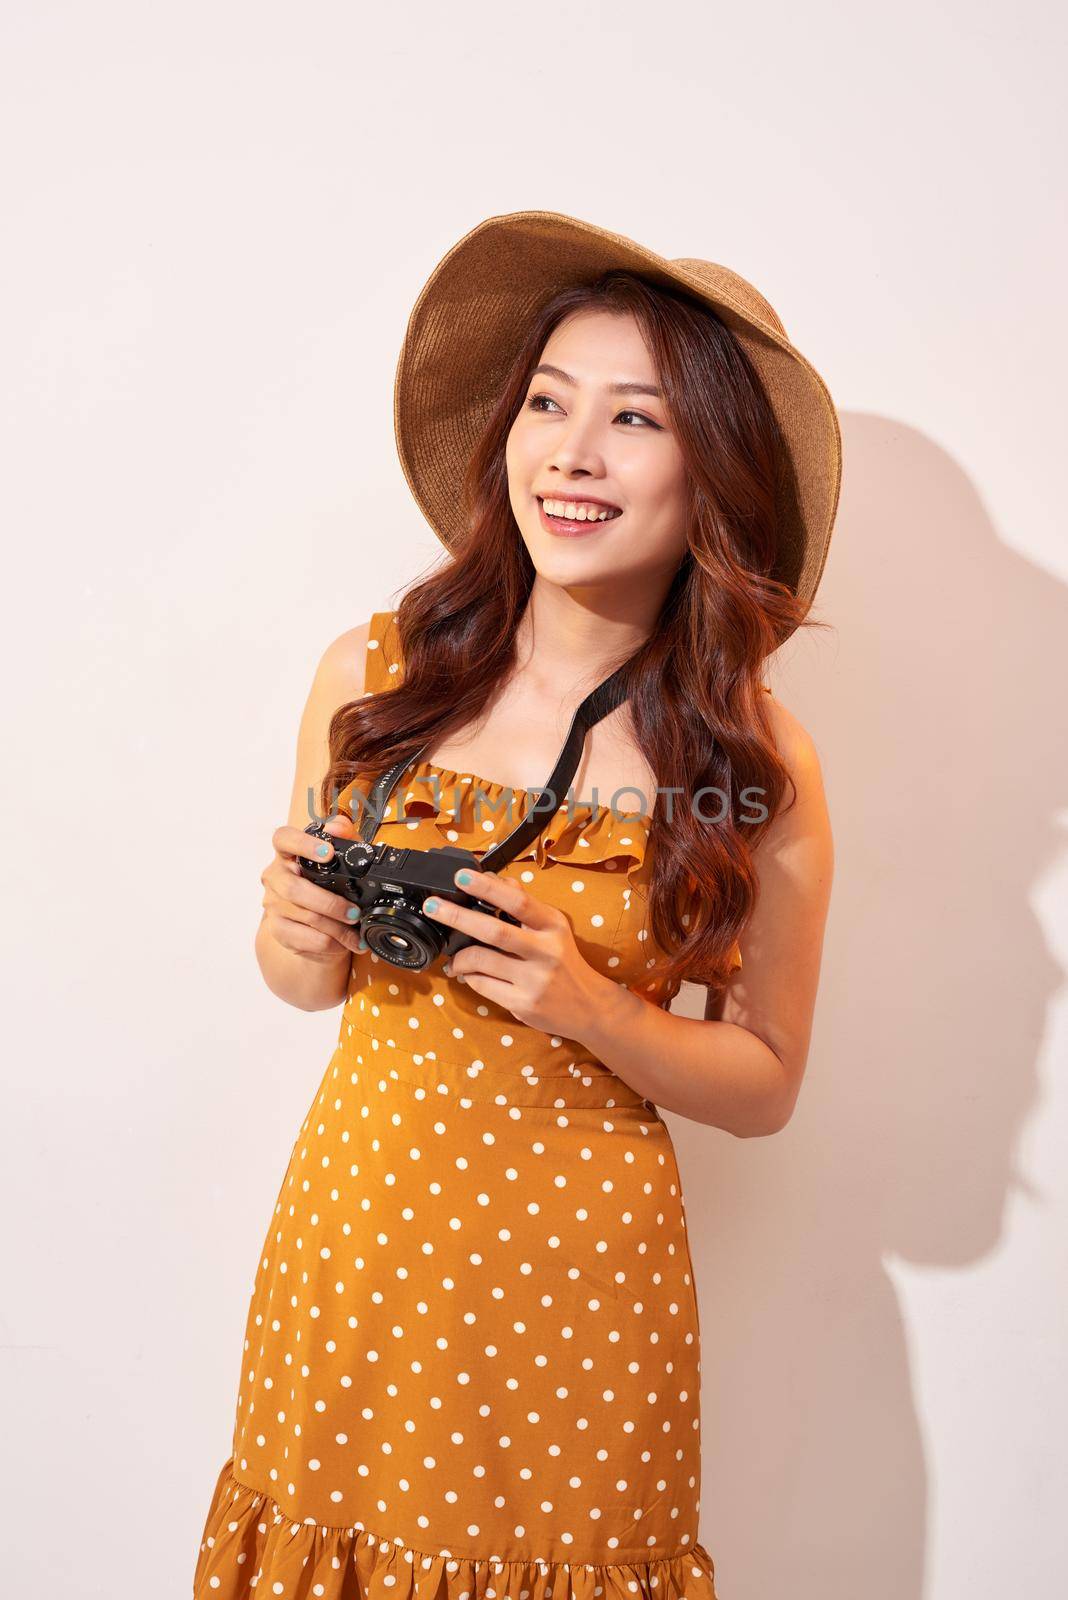 Attractive young woman with a photo camera in her hand on an isolated beige background. The concept travel by makidotvn